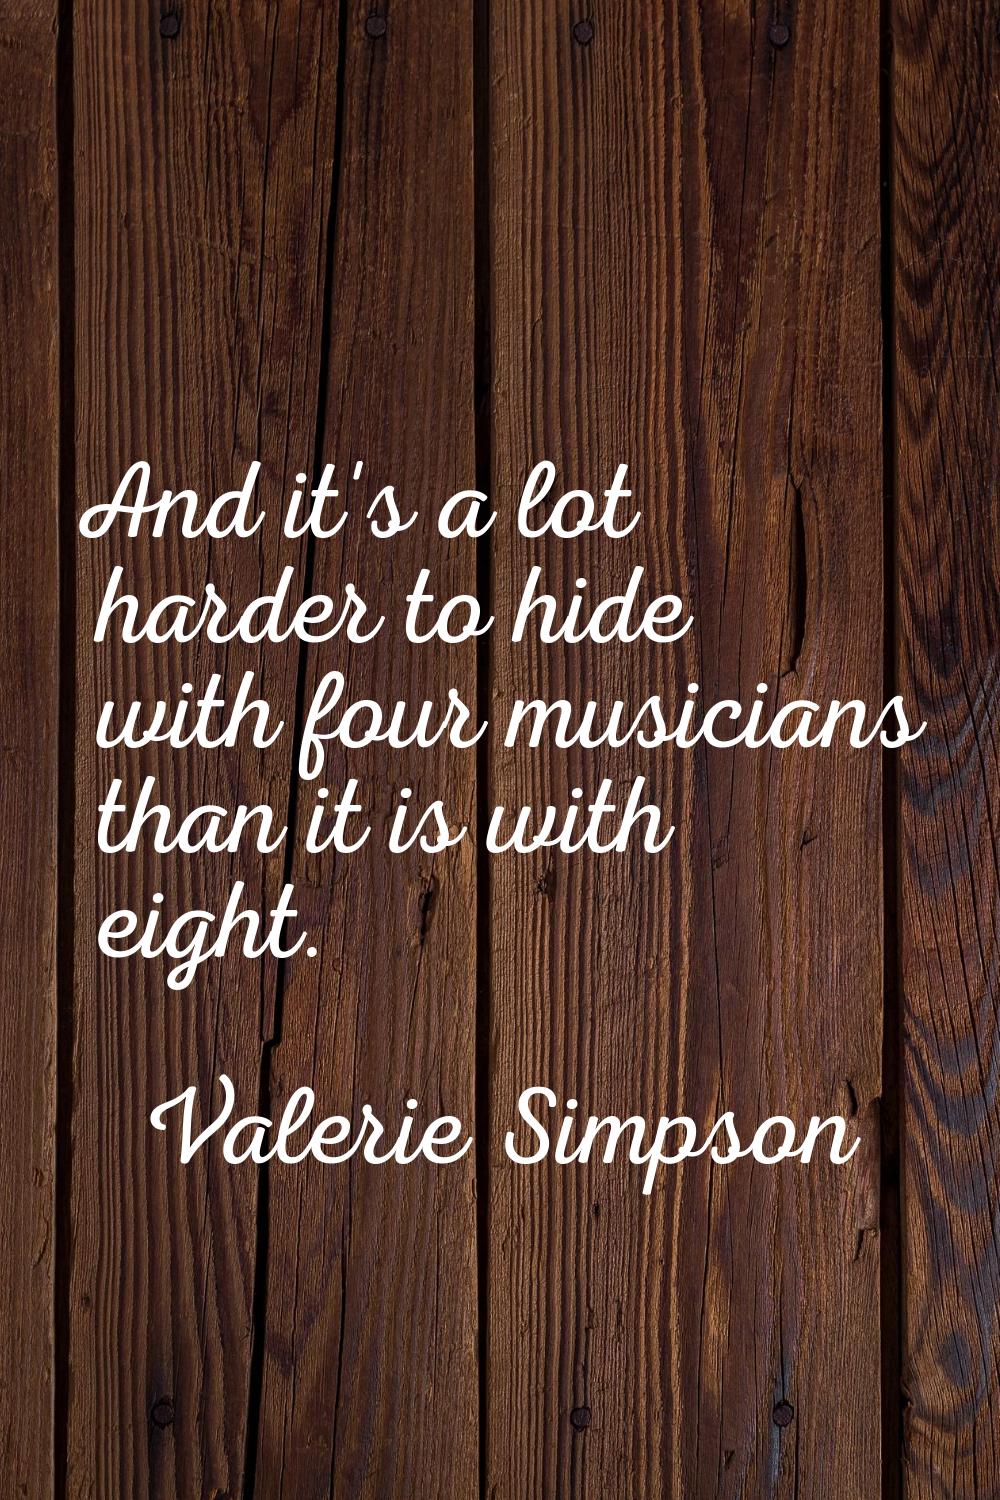 And it's a lot harder to hide with four musicians than it is with eight.